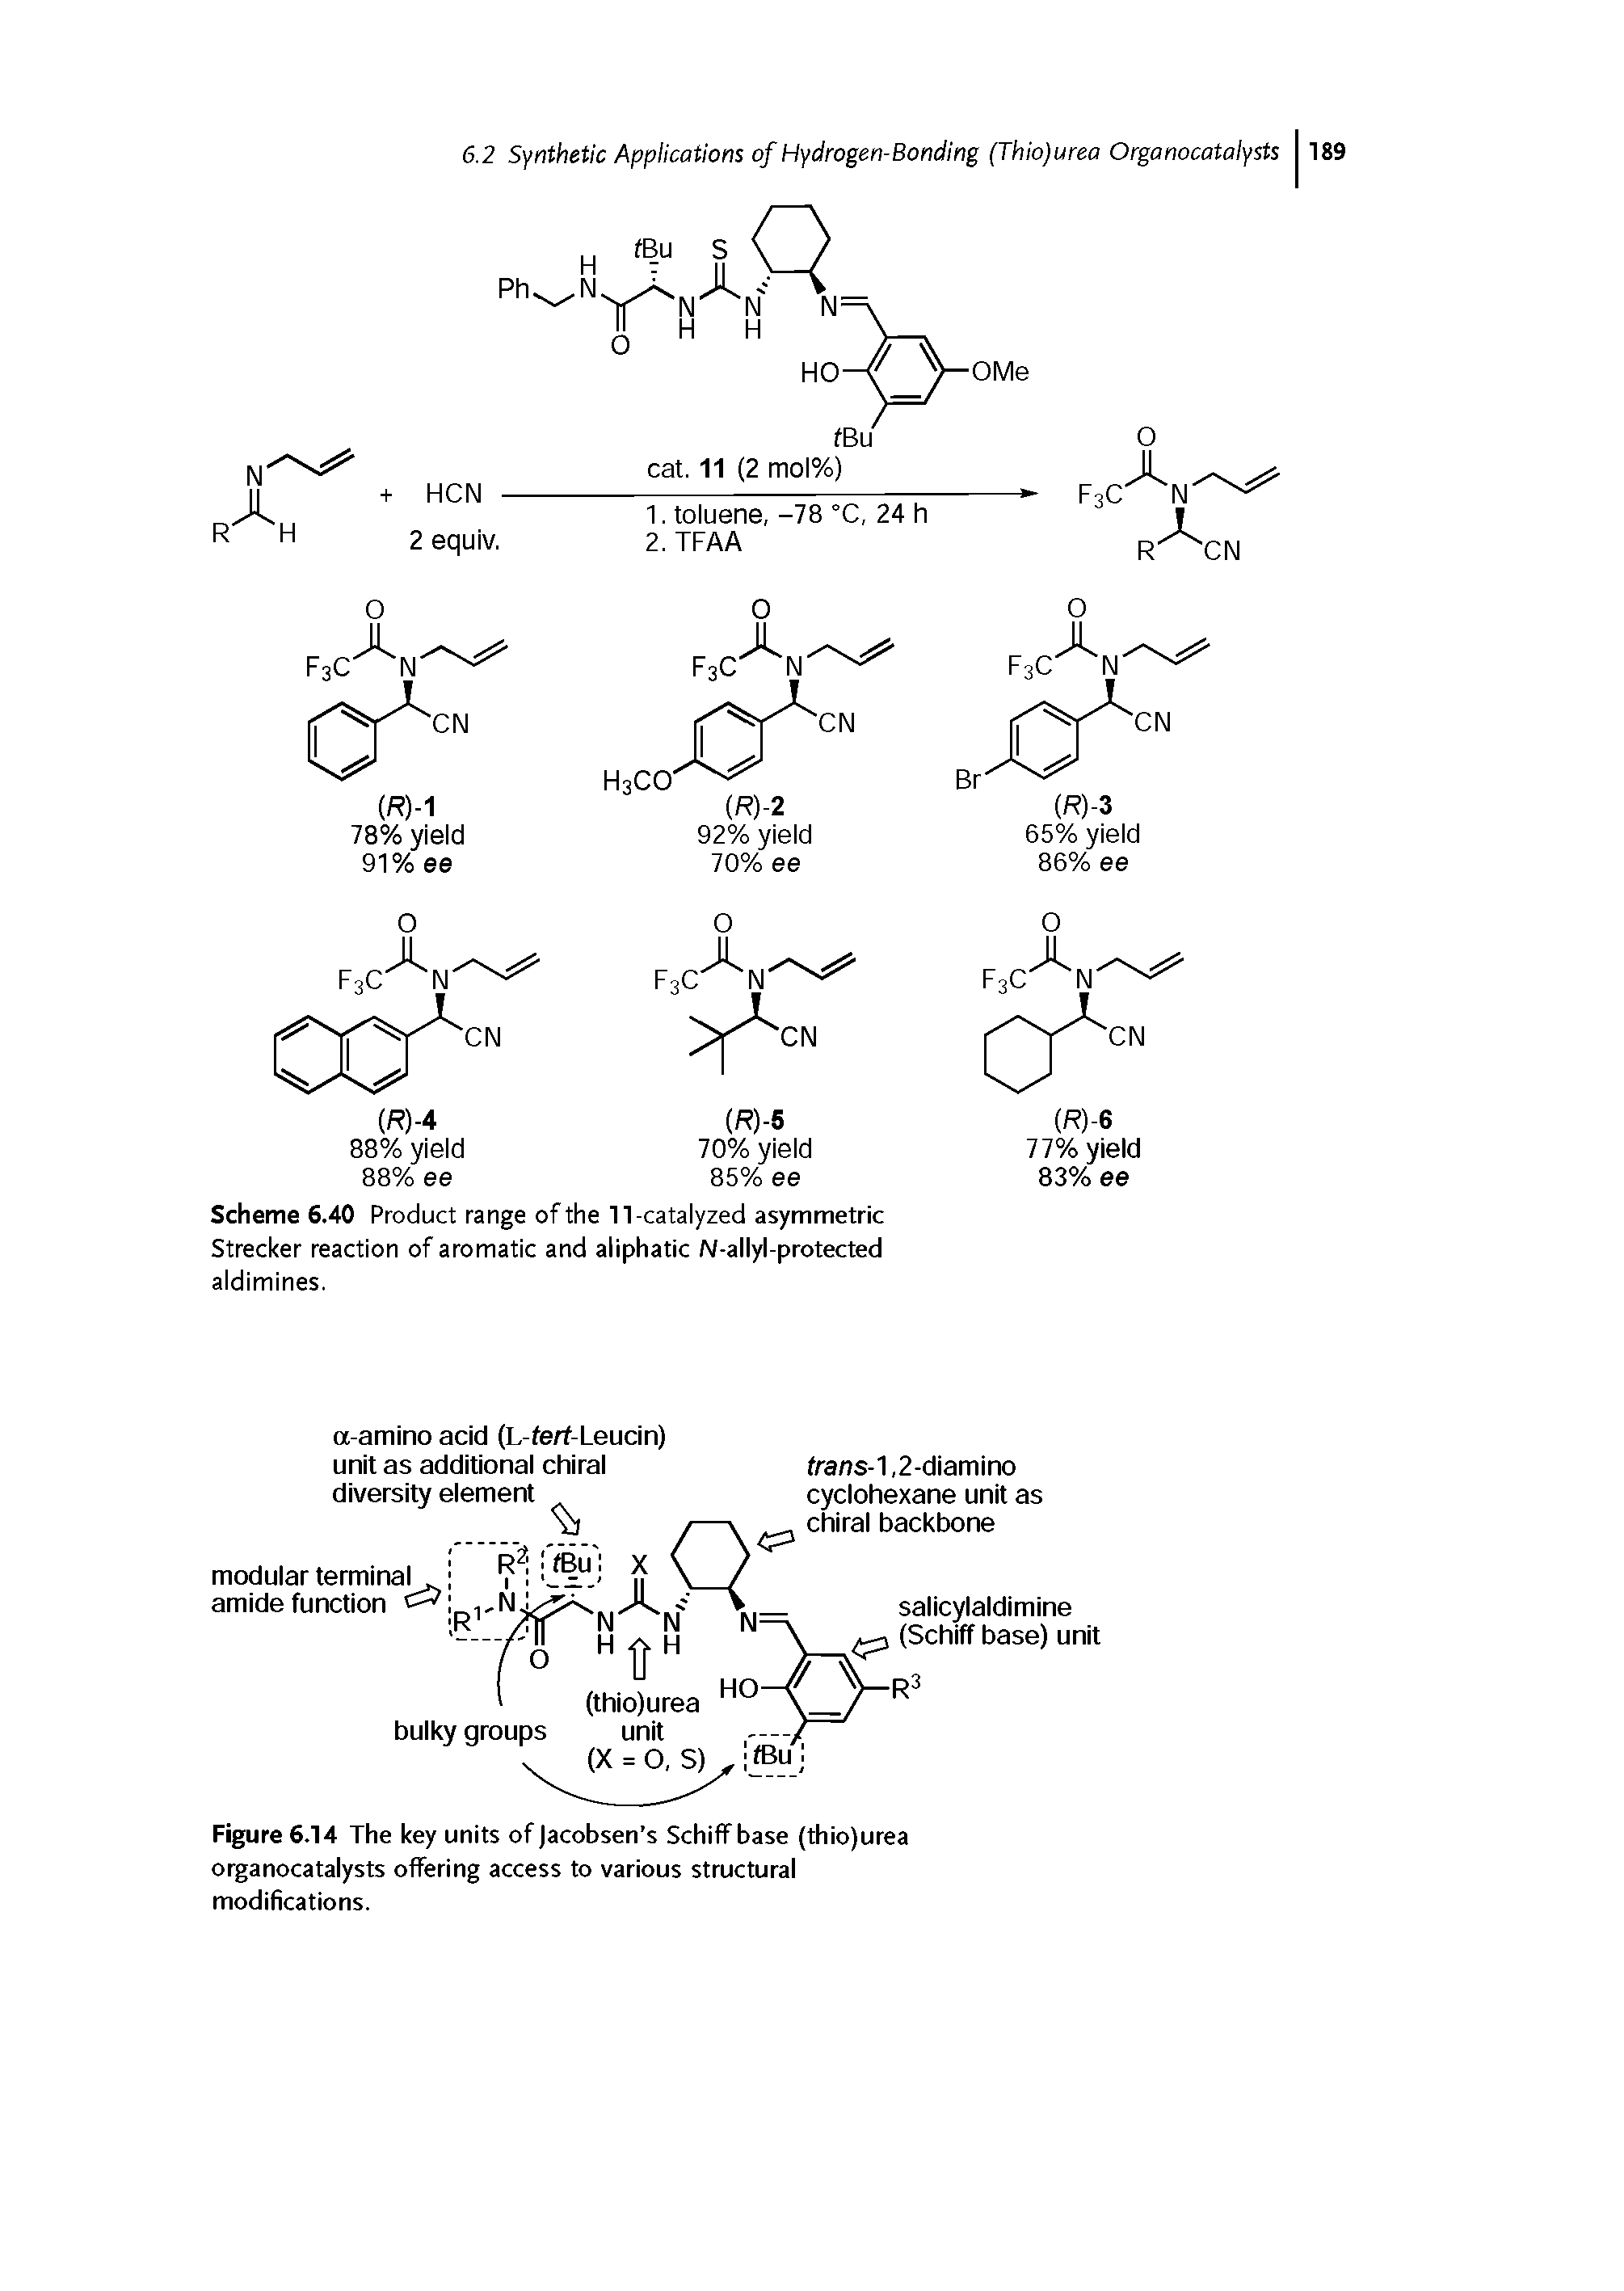 Figure 6.14 The key units of Jacobsen s Schiff base (thio)urea organocatalysts offering access to various structural modifications.